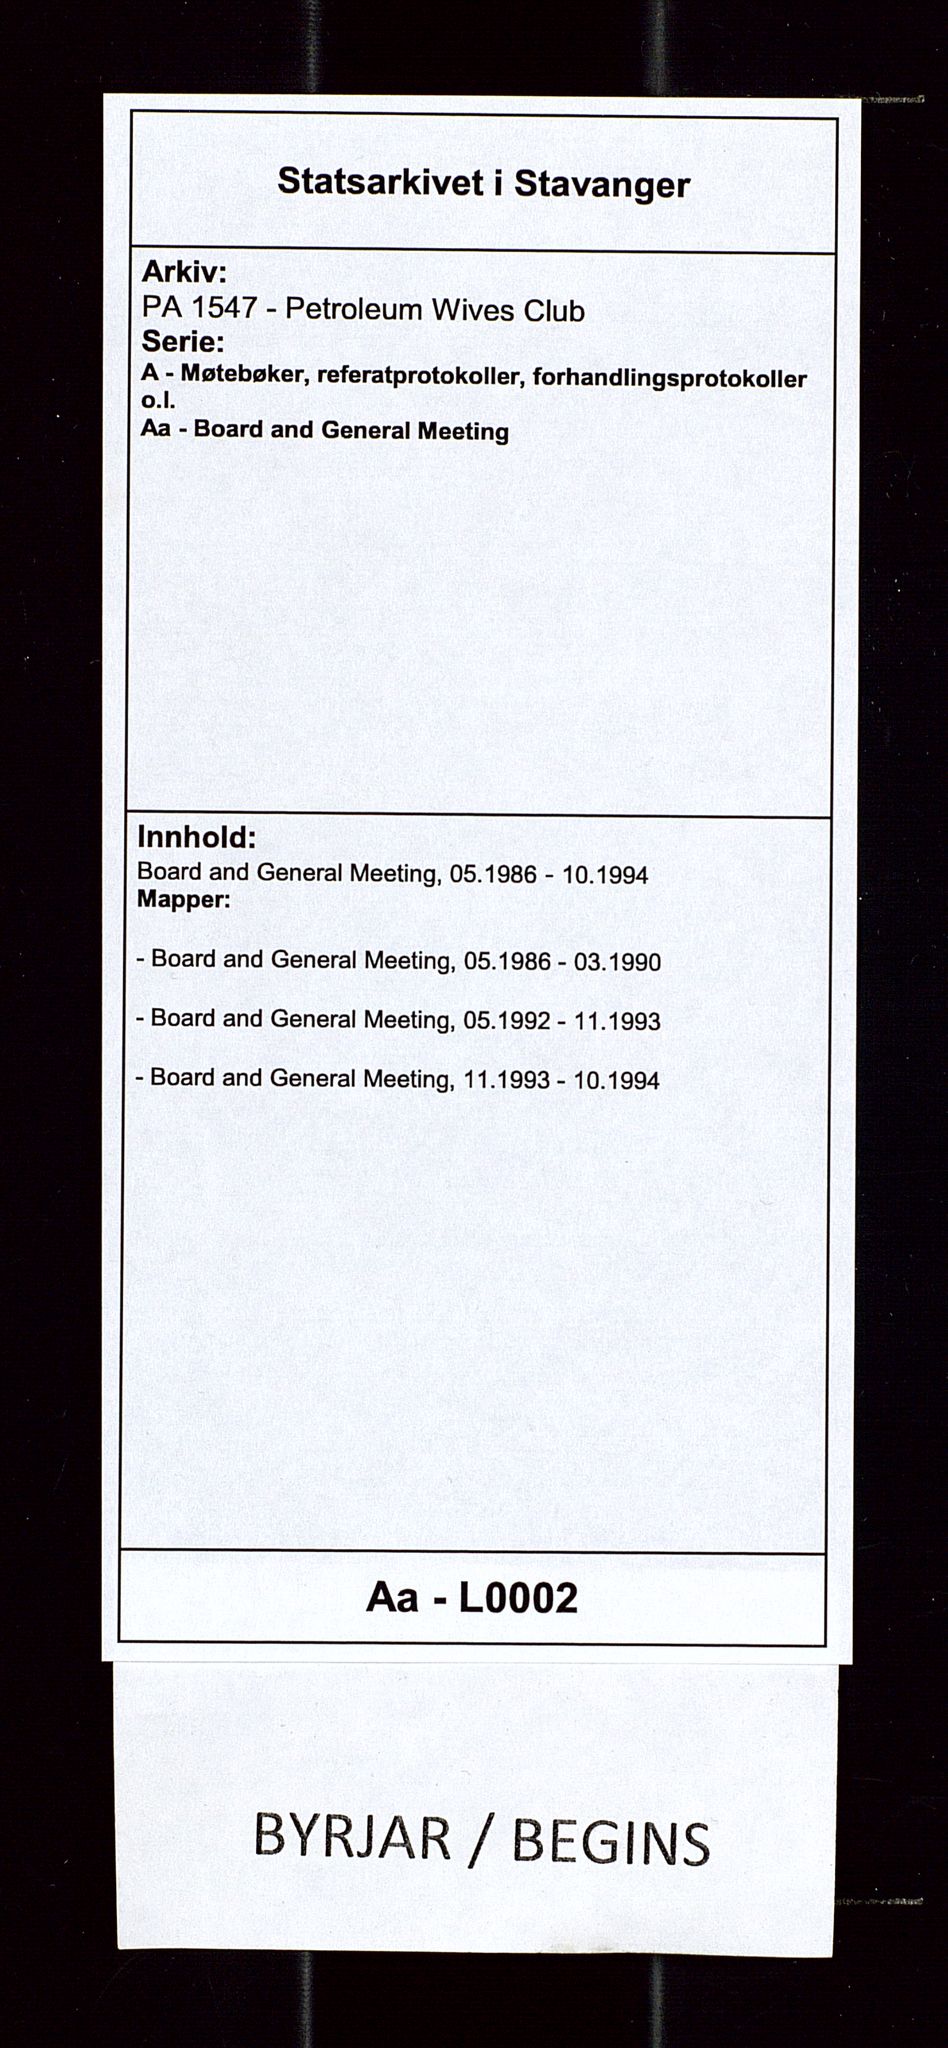 PA 1547 - Petroleum Wives Club, SAST/A-101974/A/Aa/L0002: Board and General Meeting, 1986-1994